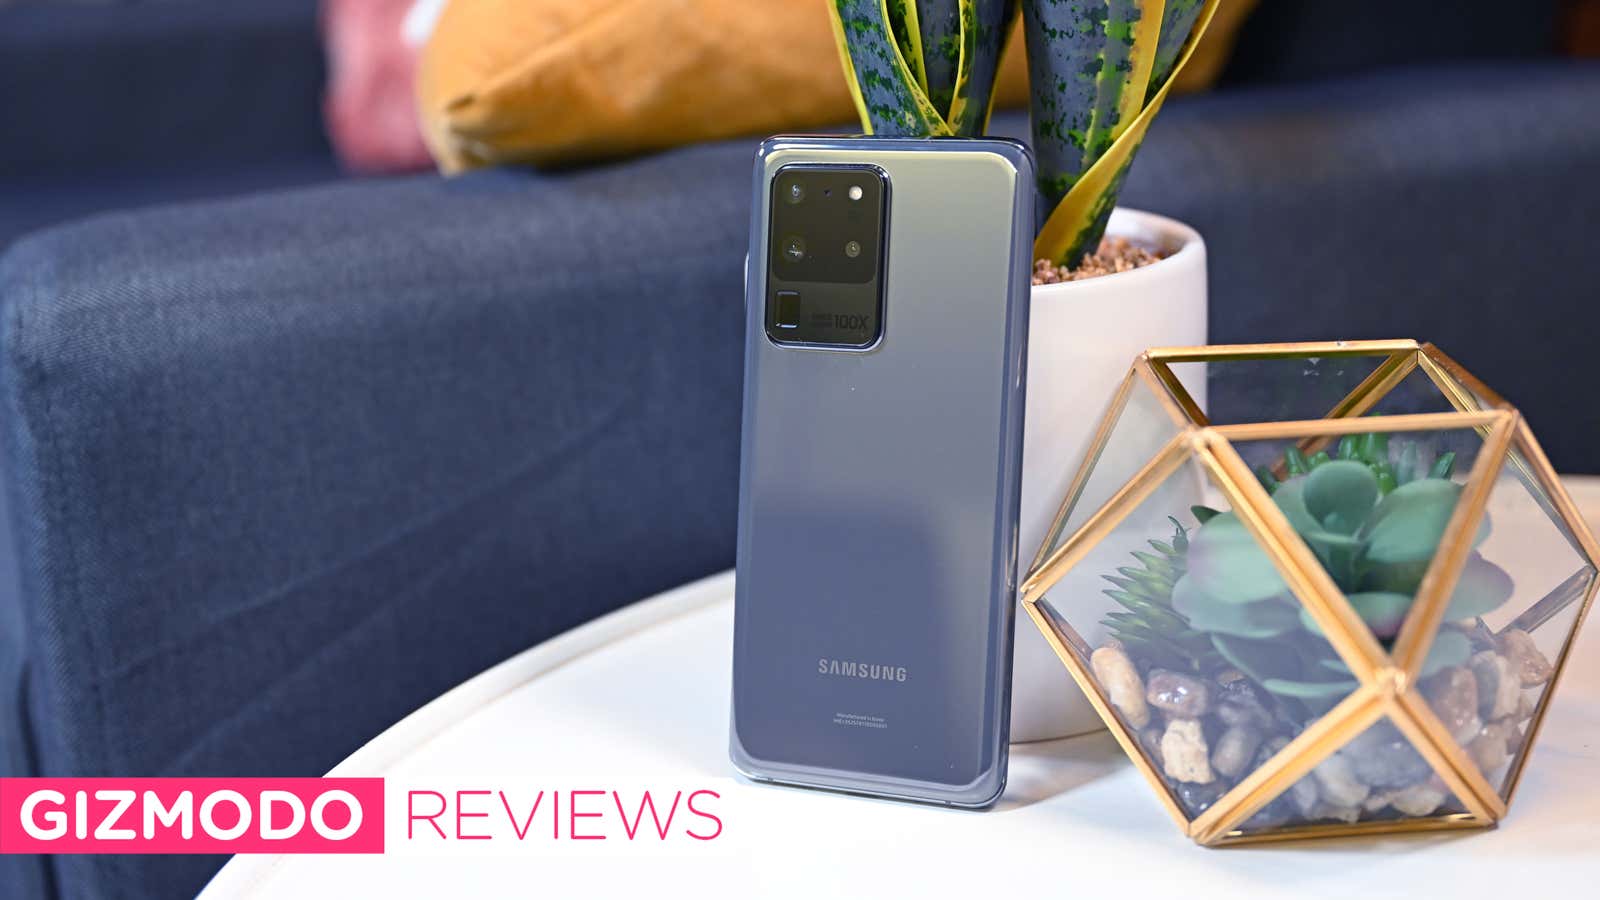 Samsung Galaxy S20 Plus review: Well-rounded premium phone